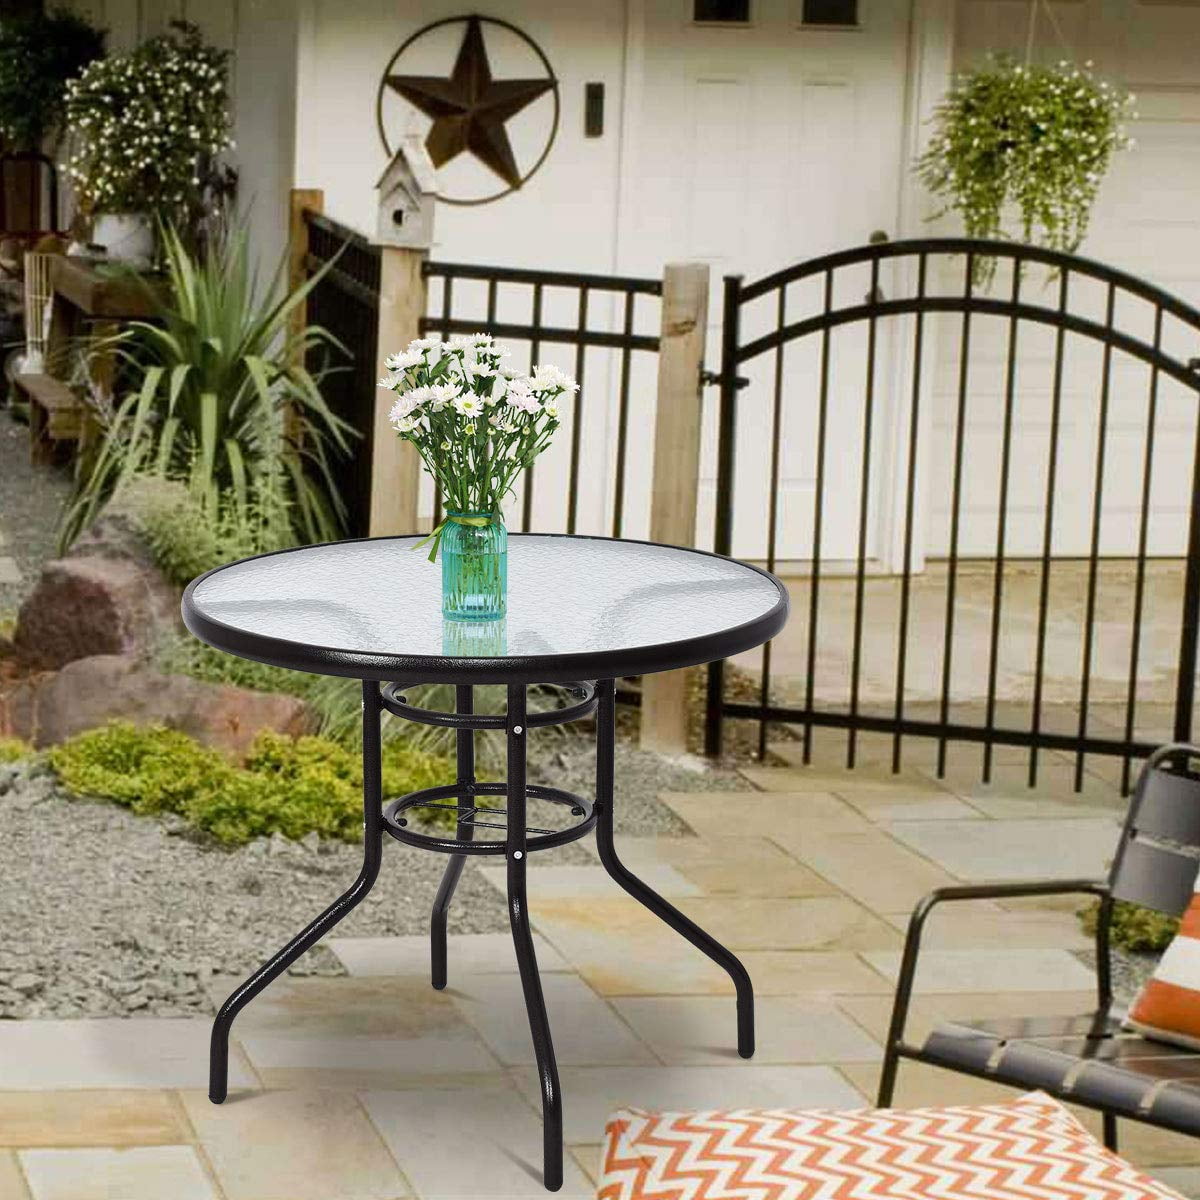 Round Glass Patio Dining Table 31, Round Dining Table With Umbrella Hole